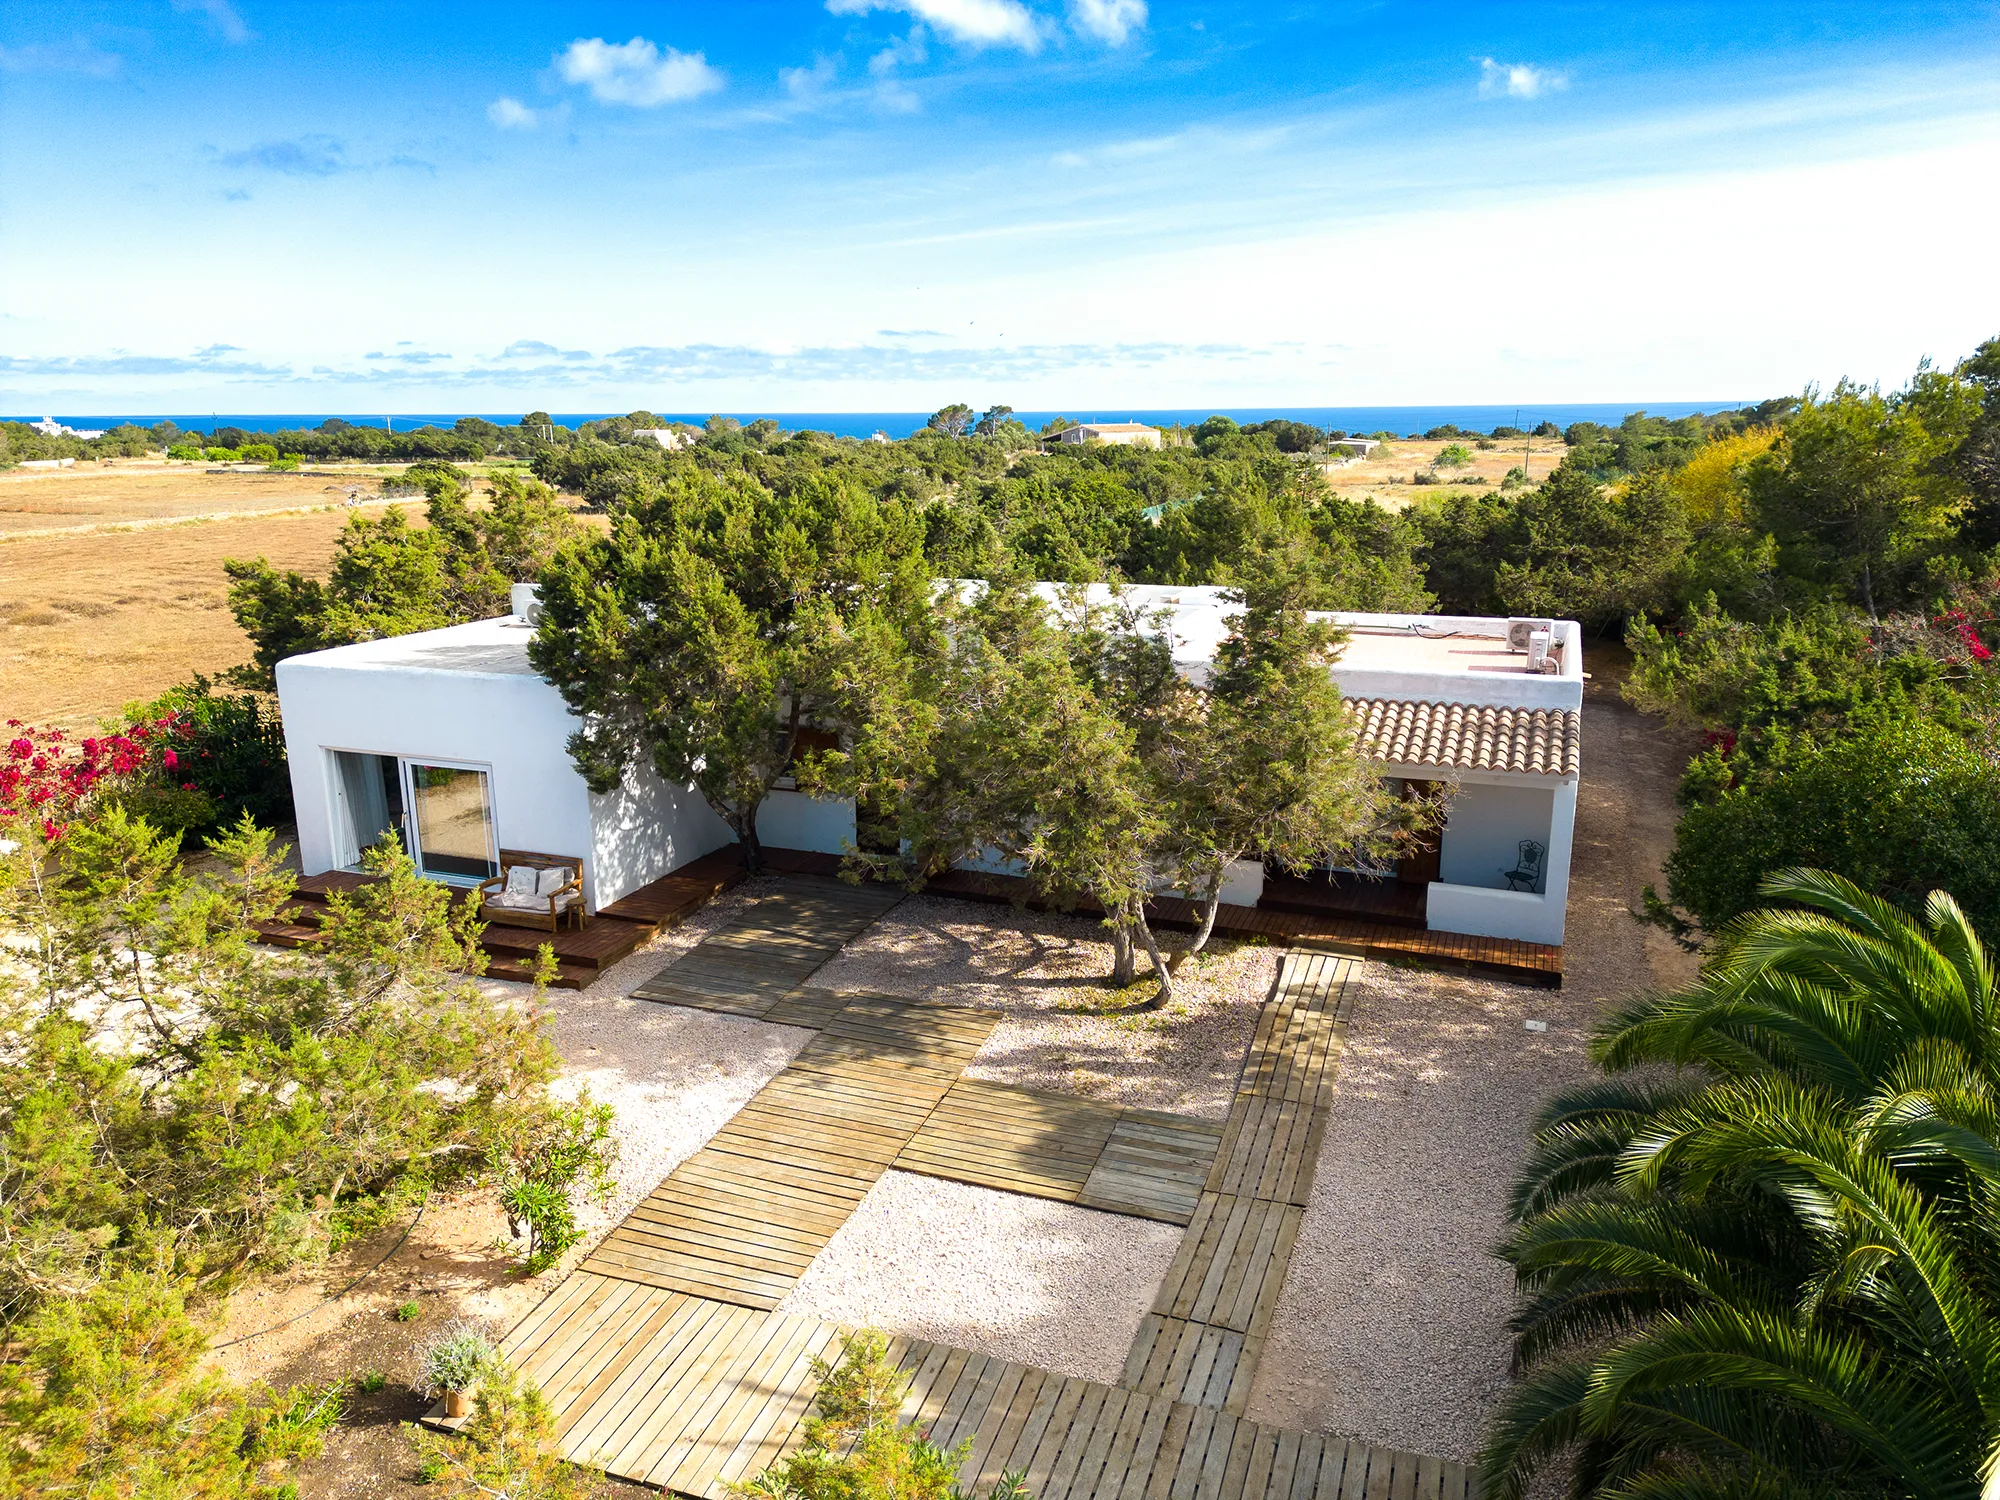 Very nice villa in Migjorn a quiet oasis on Formentera